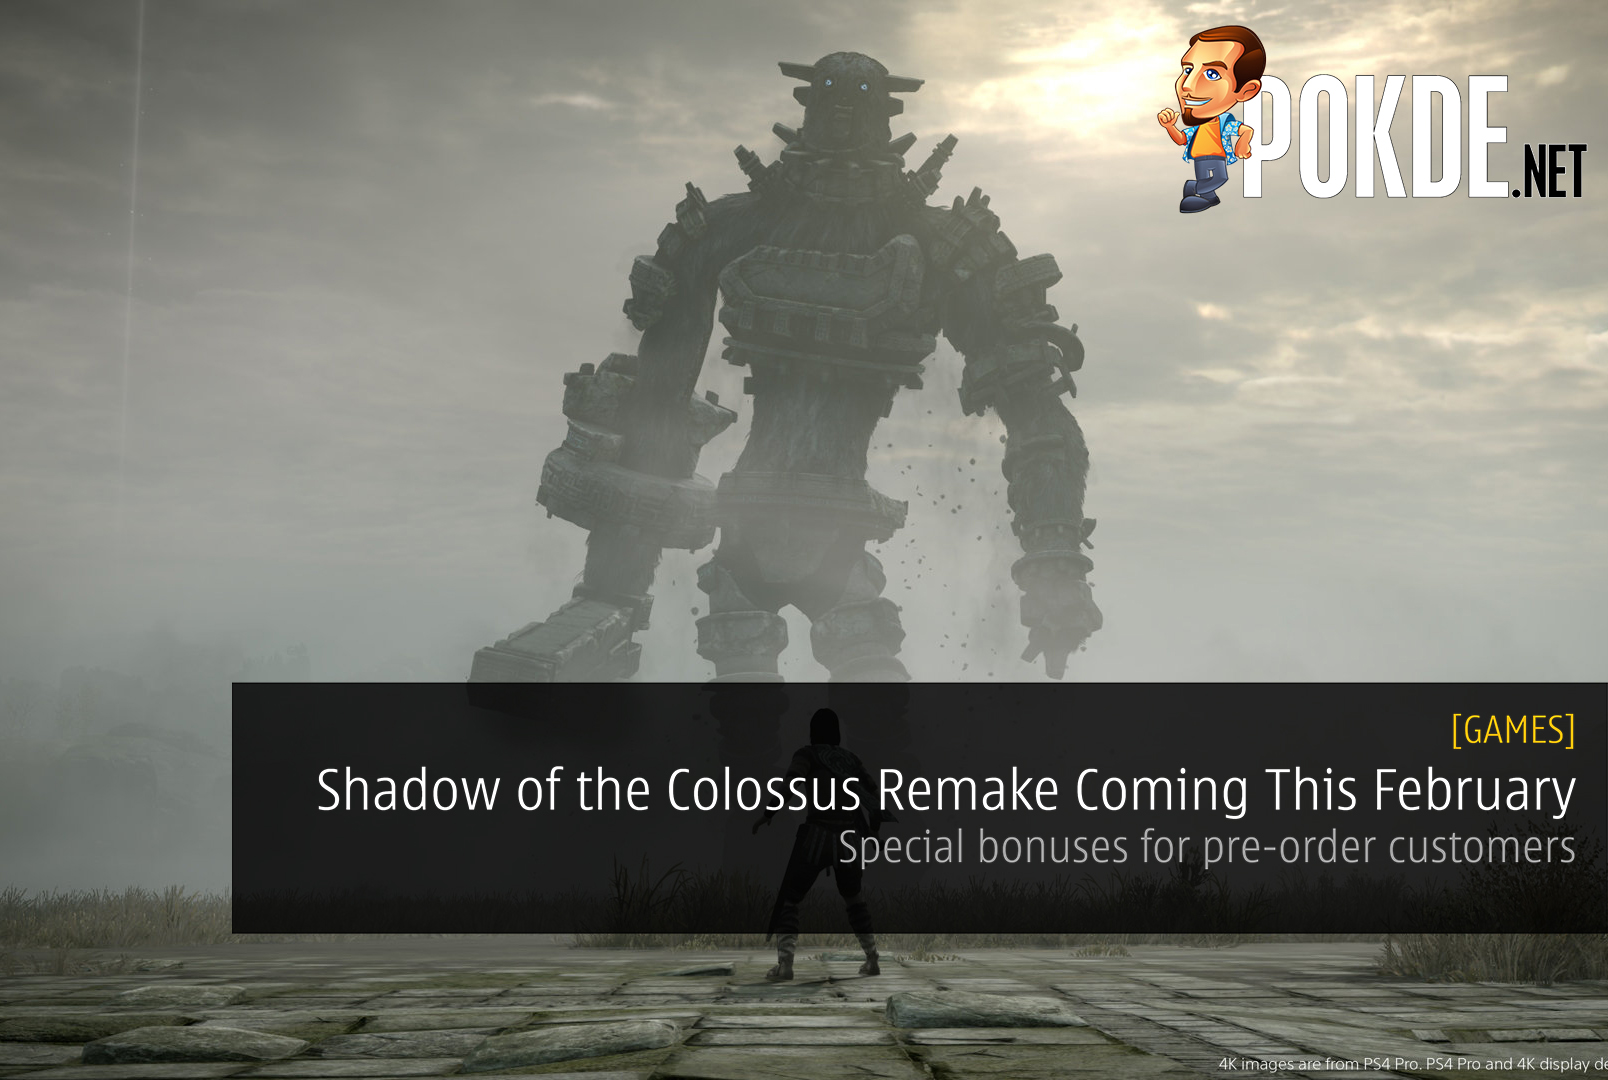 Shadow of the Colossus Remake Coming To The PS4 This February - Special bonuses for pre-order customers 23